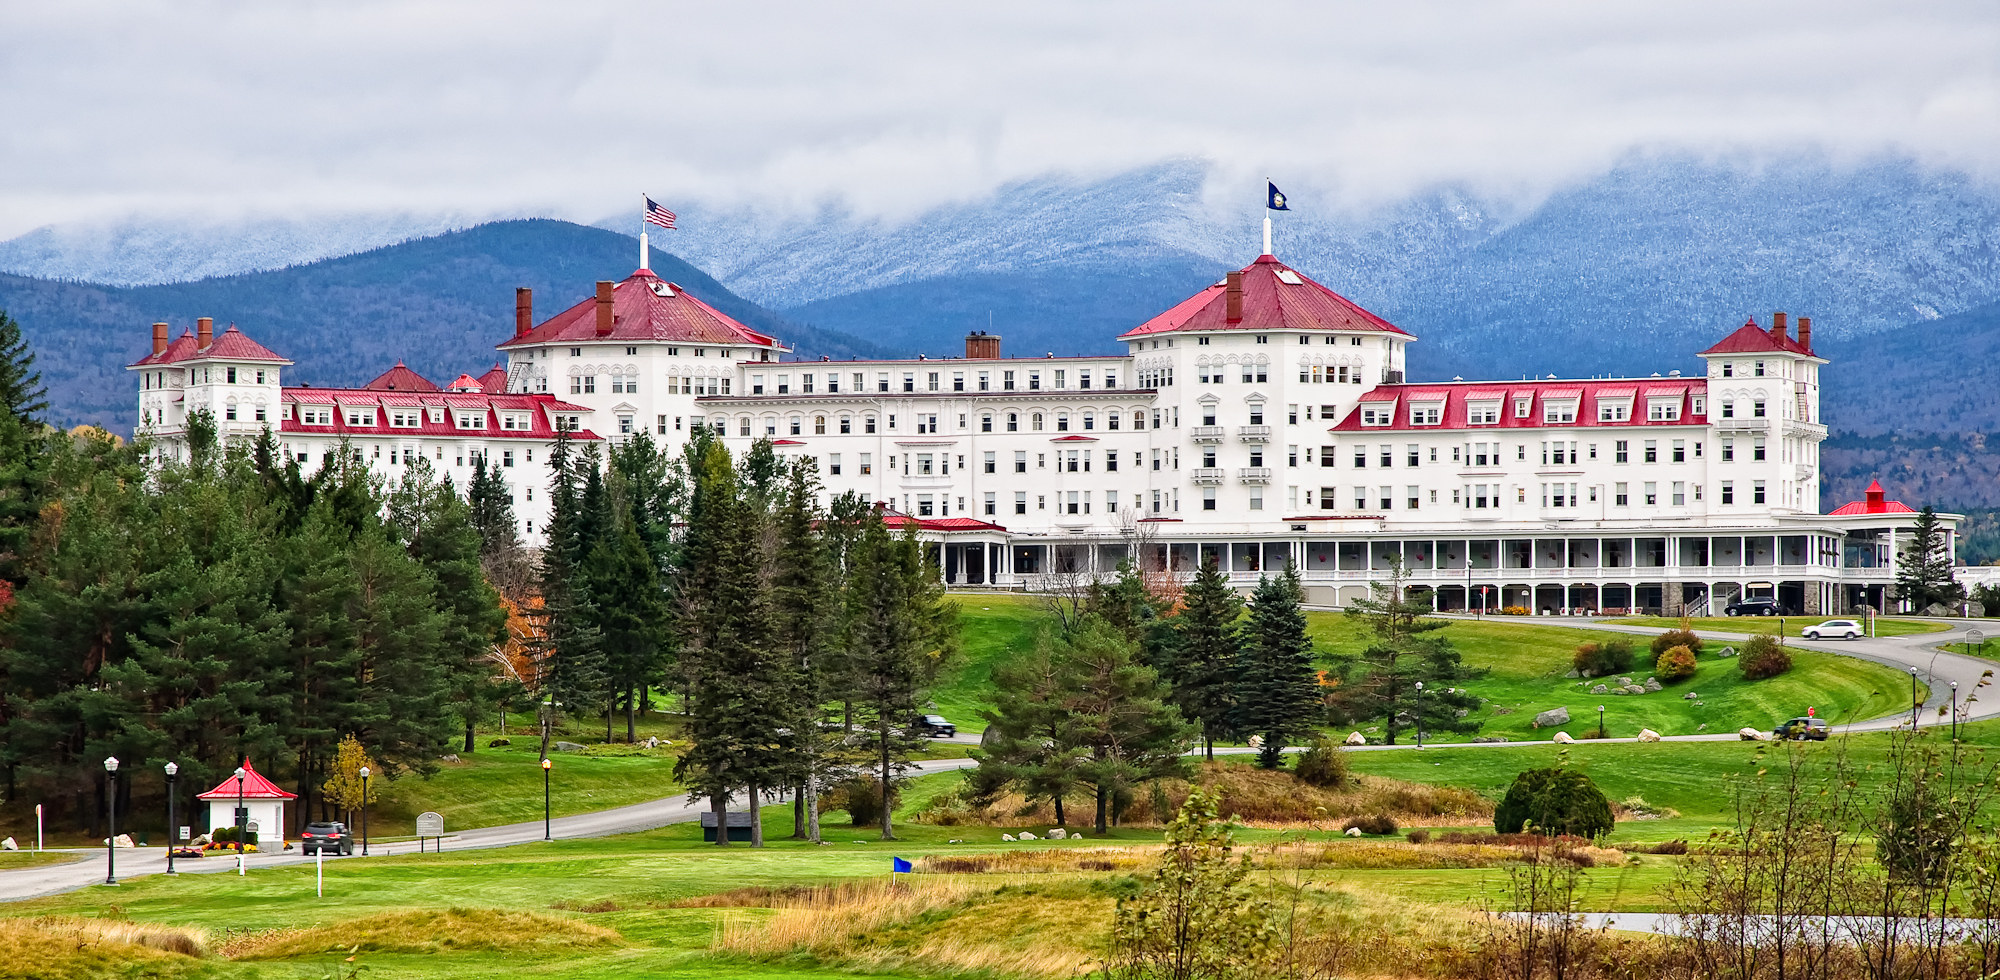 Mt Washington Hotel (user submitted)